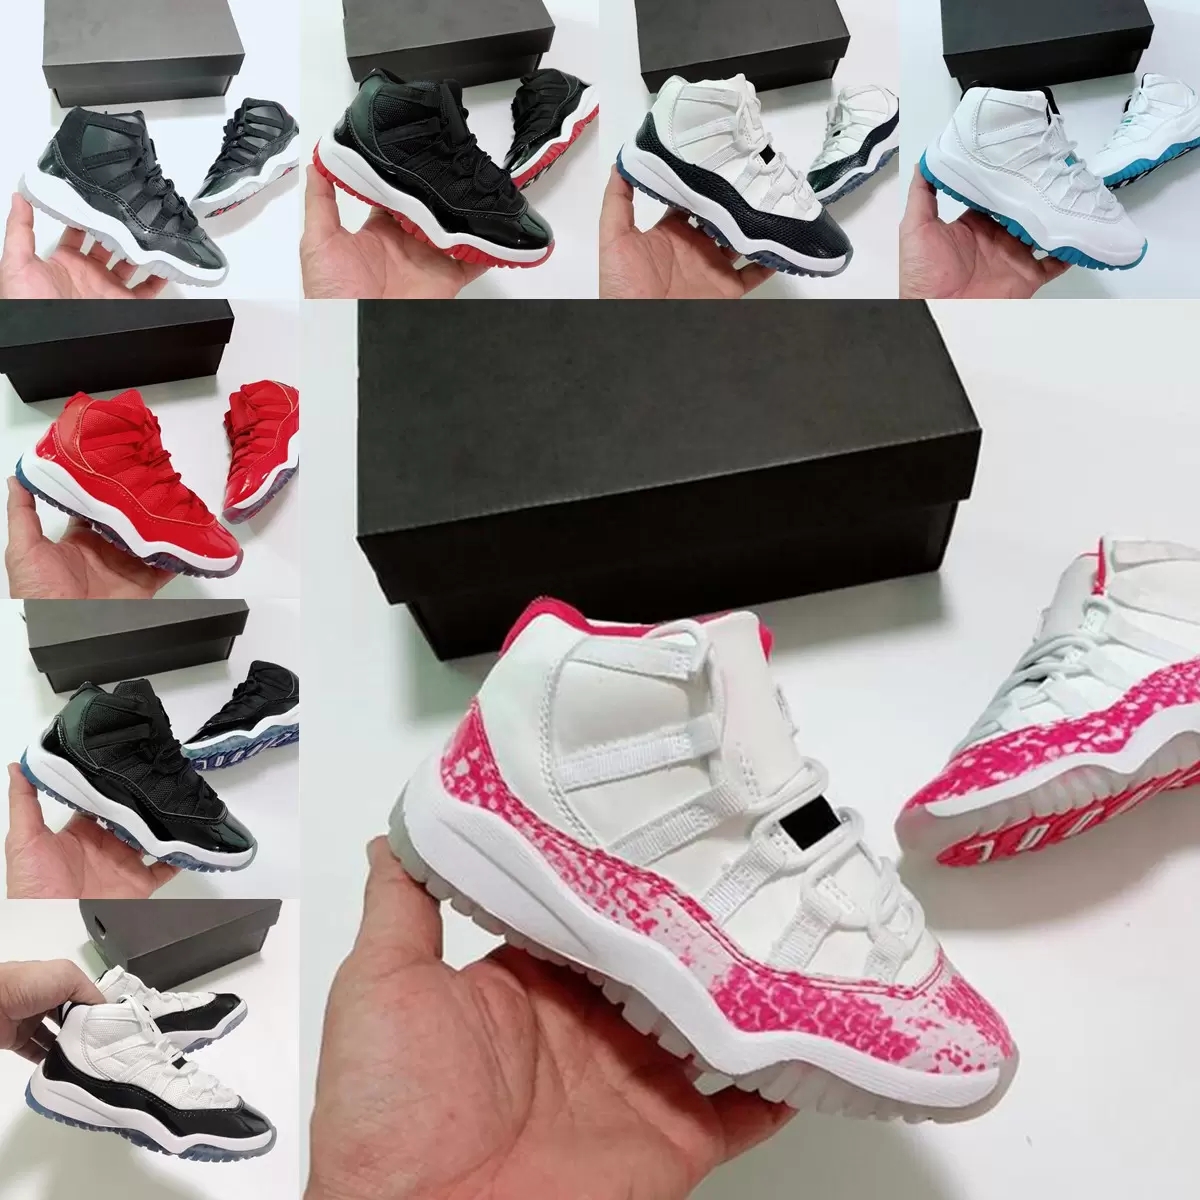 

Bred XI 11S Kids Basketball Shoes Gym Red Infant & Children toddler Gamma Blue Concord 11 trainers boy girl tn sneakers Space Jam Child Kids EUR28-35, Box